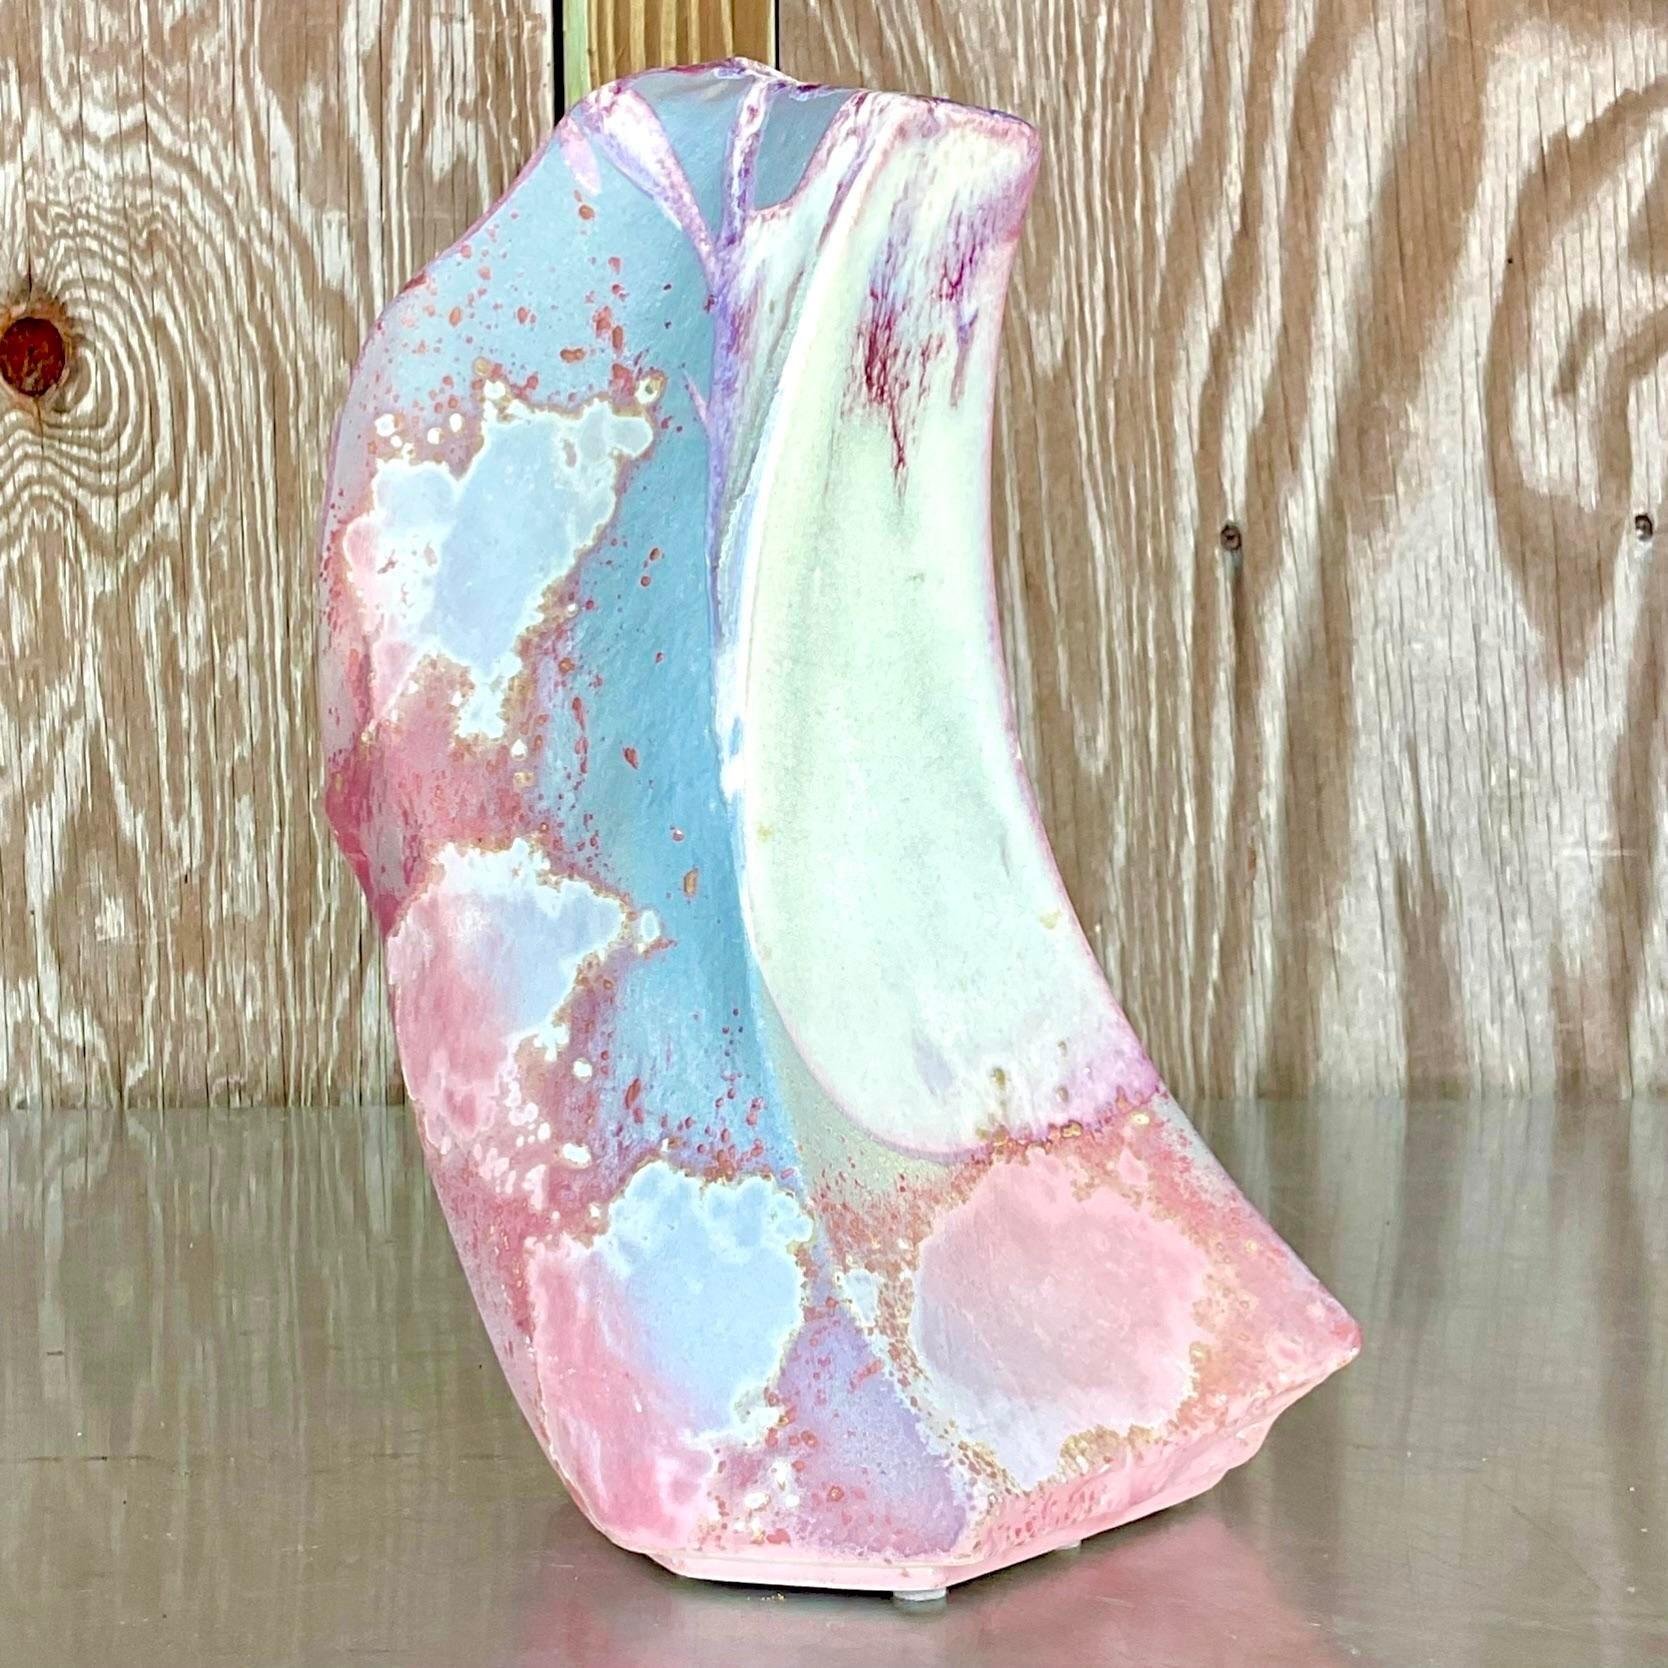 A fantastic vintage Boho pottery vase. Made by the iconic Tony Evans and signed on the bottom. Beautiful Raku fired finish in brilliant shades of pink. Acquired from a Palm Beach estate.